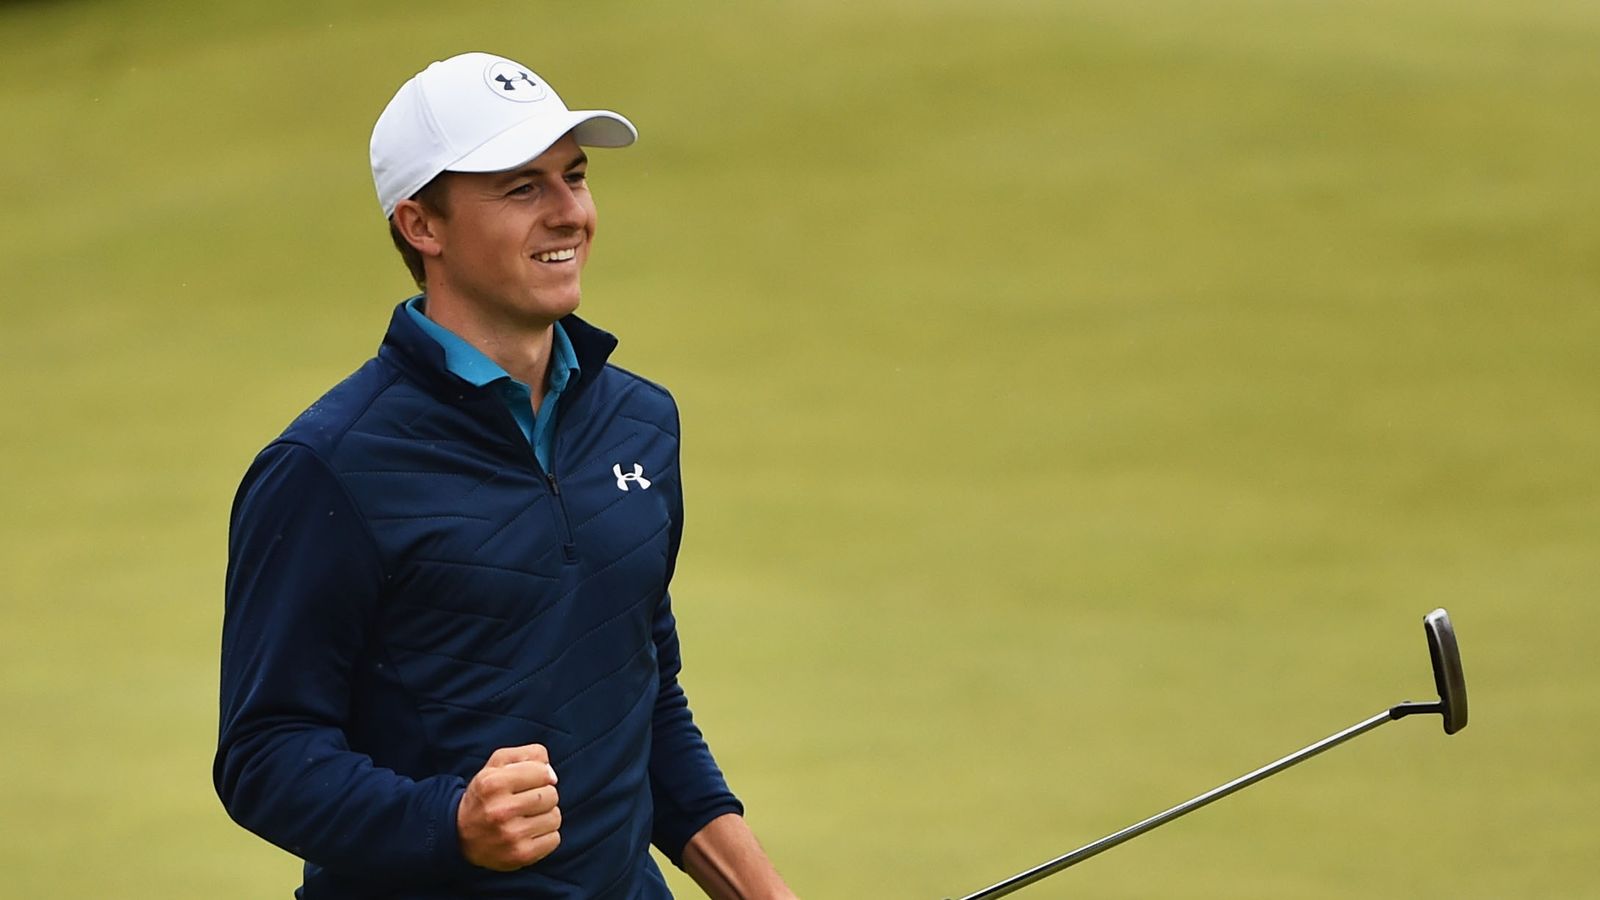 Jordan Spieth will complete the career Grand Slam, says Gary Player